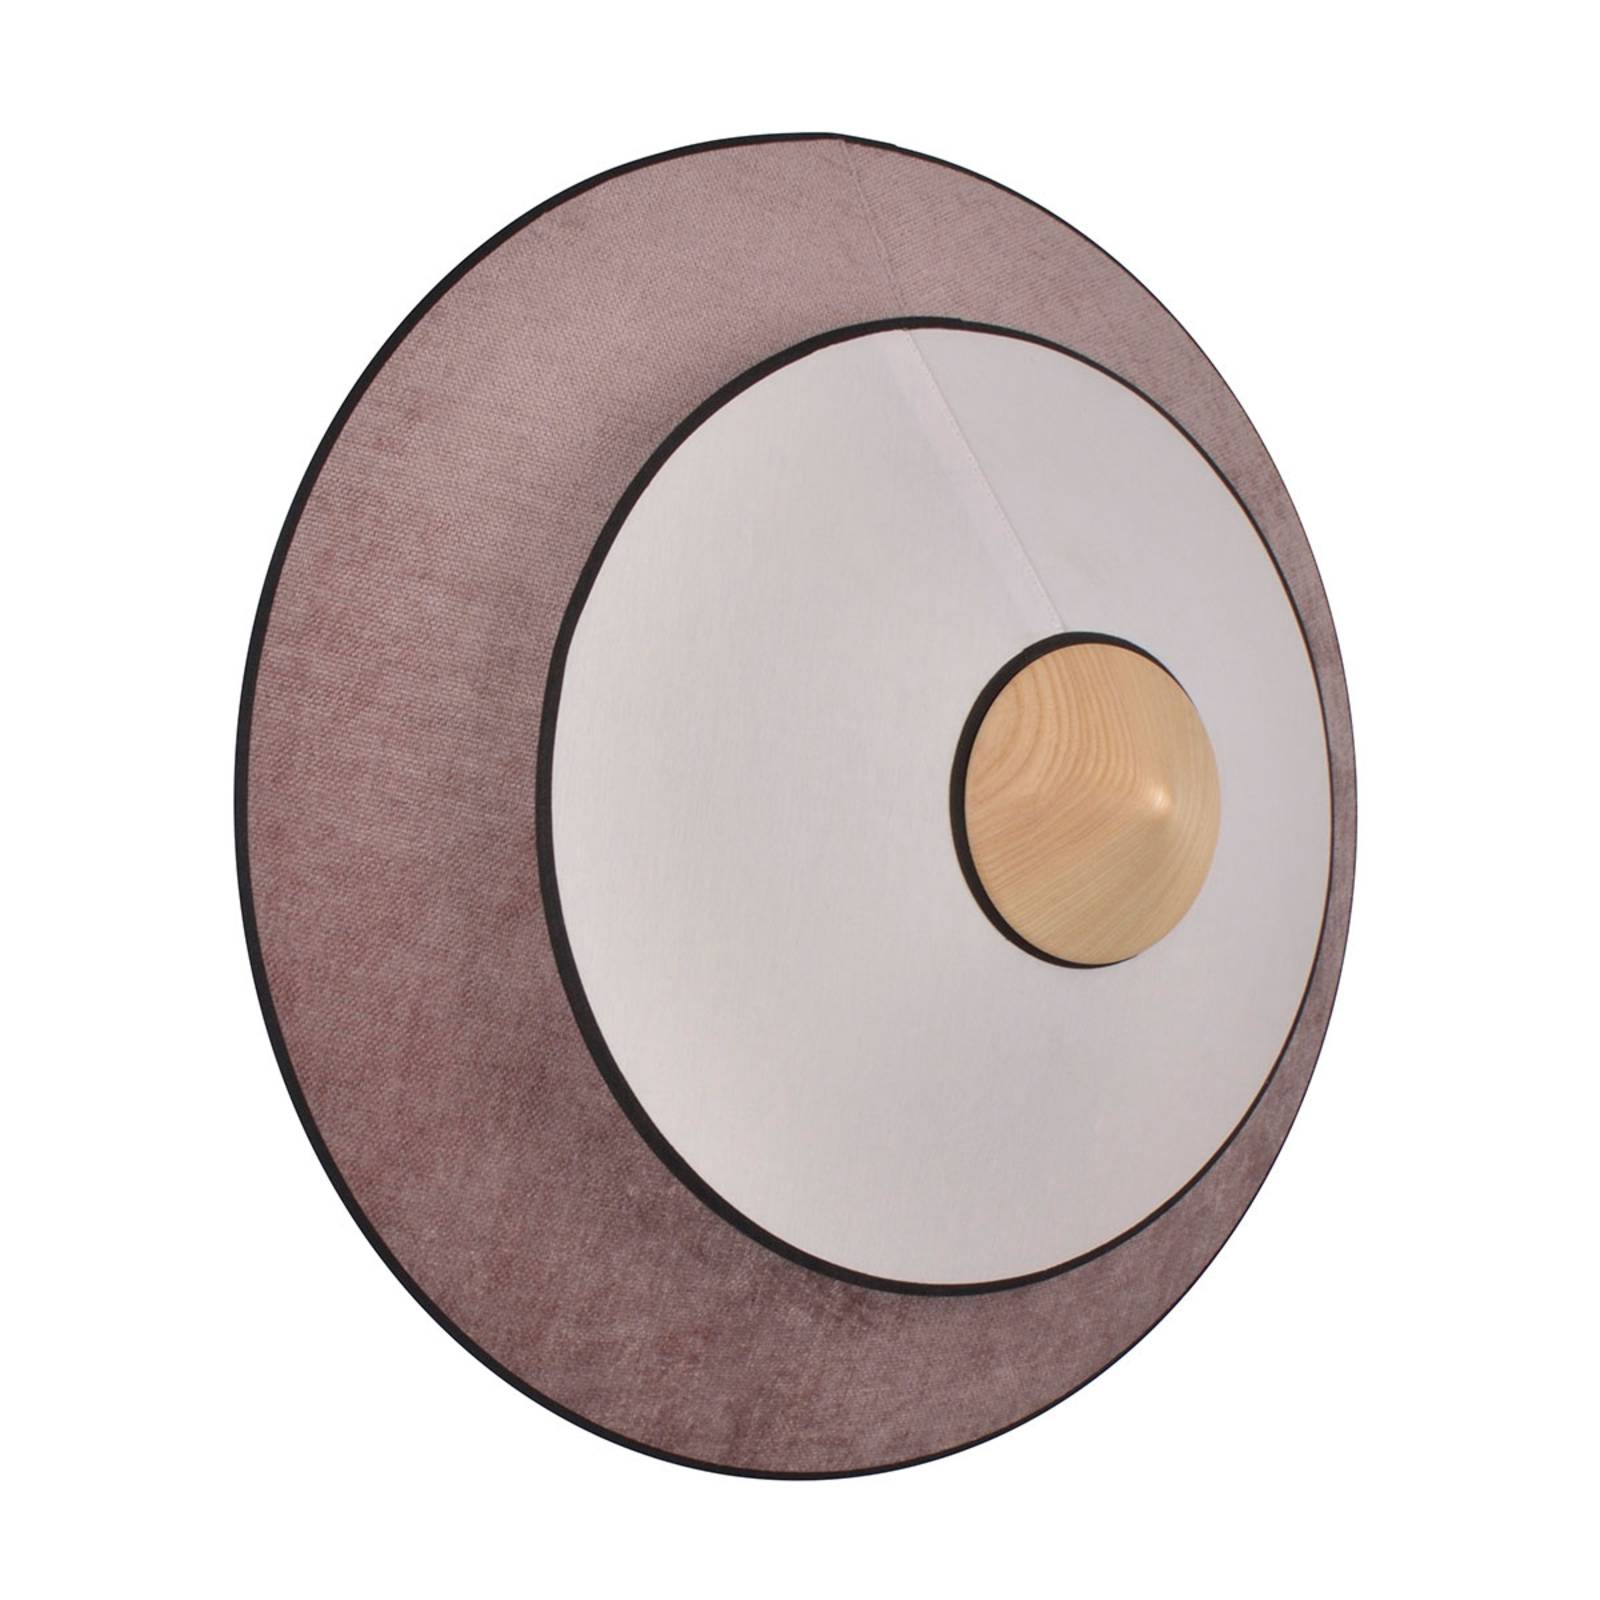 Forestier Cymbal S LED-Wandleuchte, puderrosa